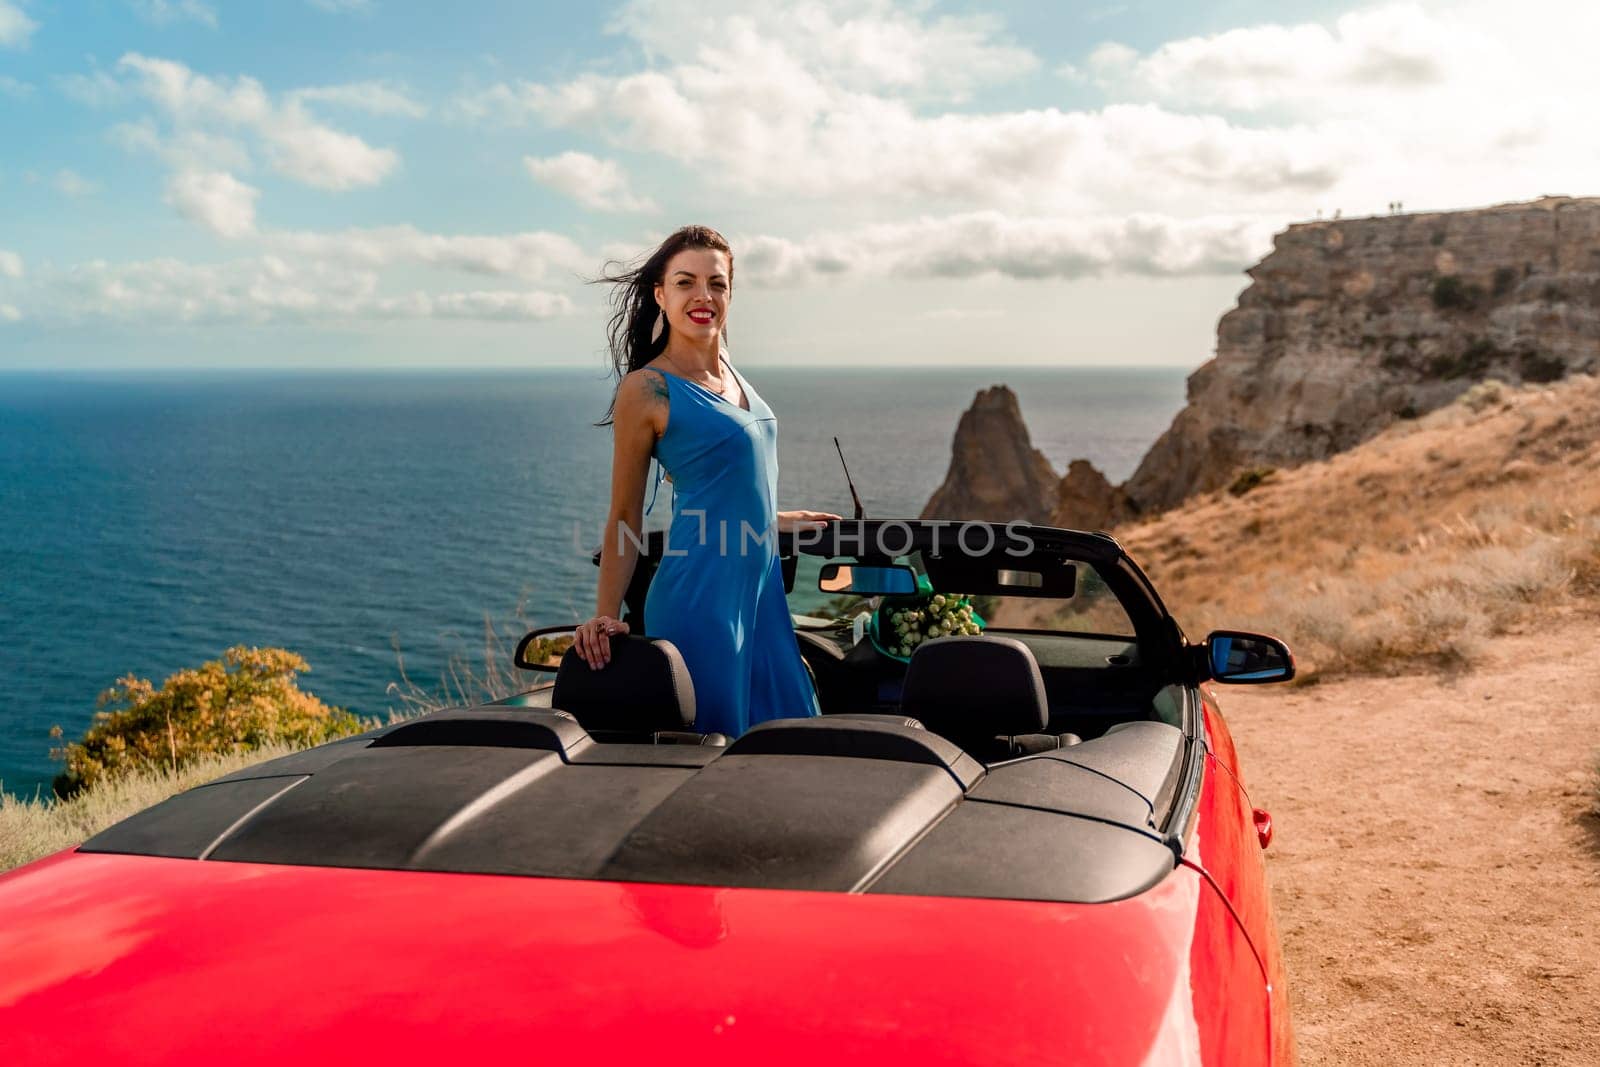 A woman is standing in front of a red convertible car. She is wearing a blue dress and smiling. The scene is set on a beach, with the ocean in the background. Scene is cheerful and relaxed